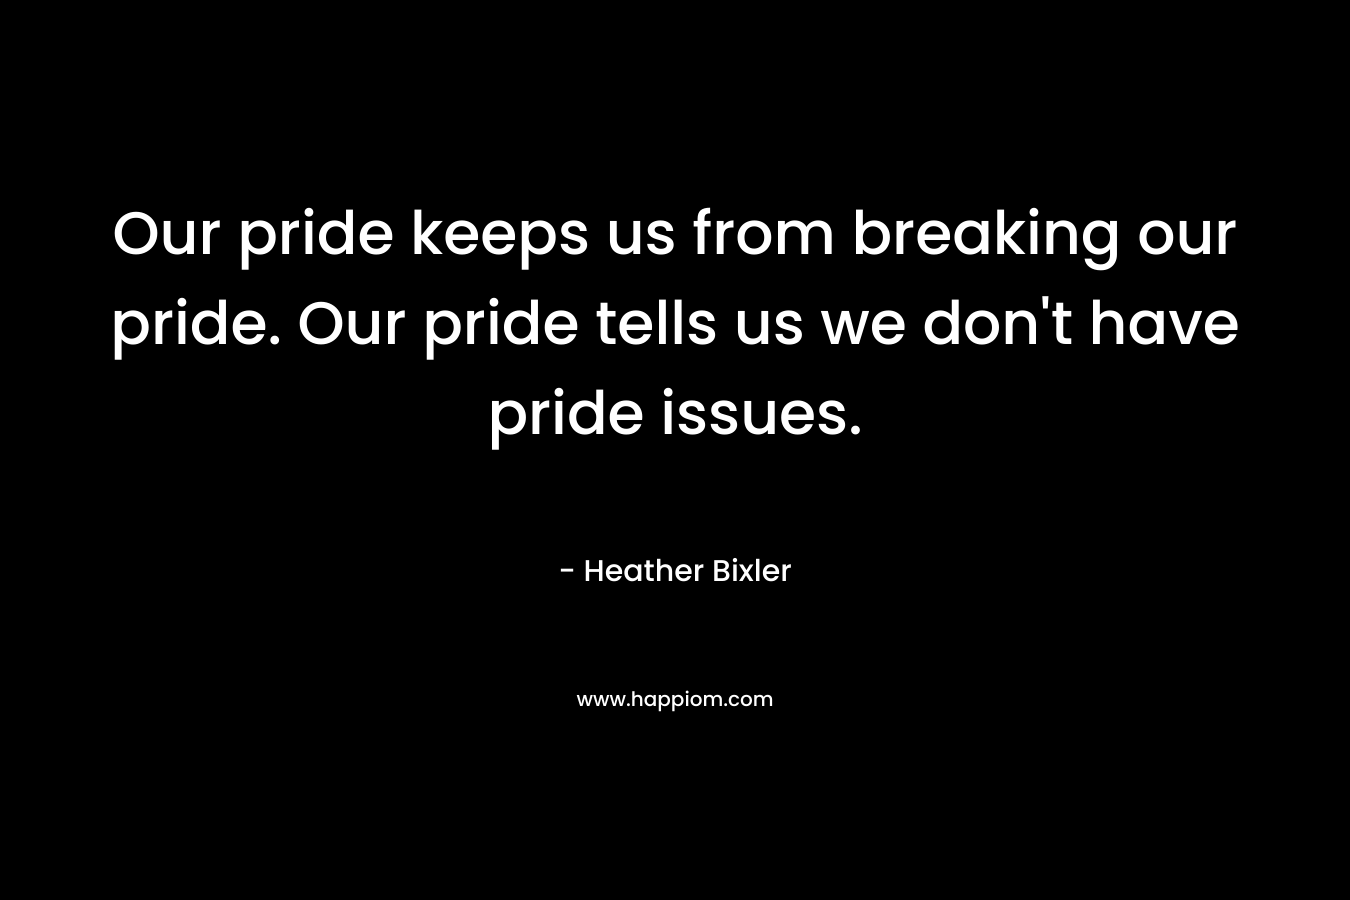 Our pride keeps us from breaking our pride. Our pride tells us we don't have pride issues.